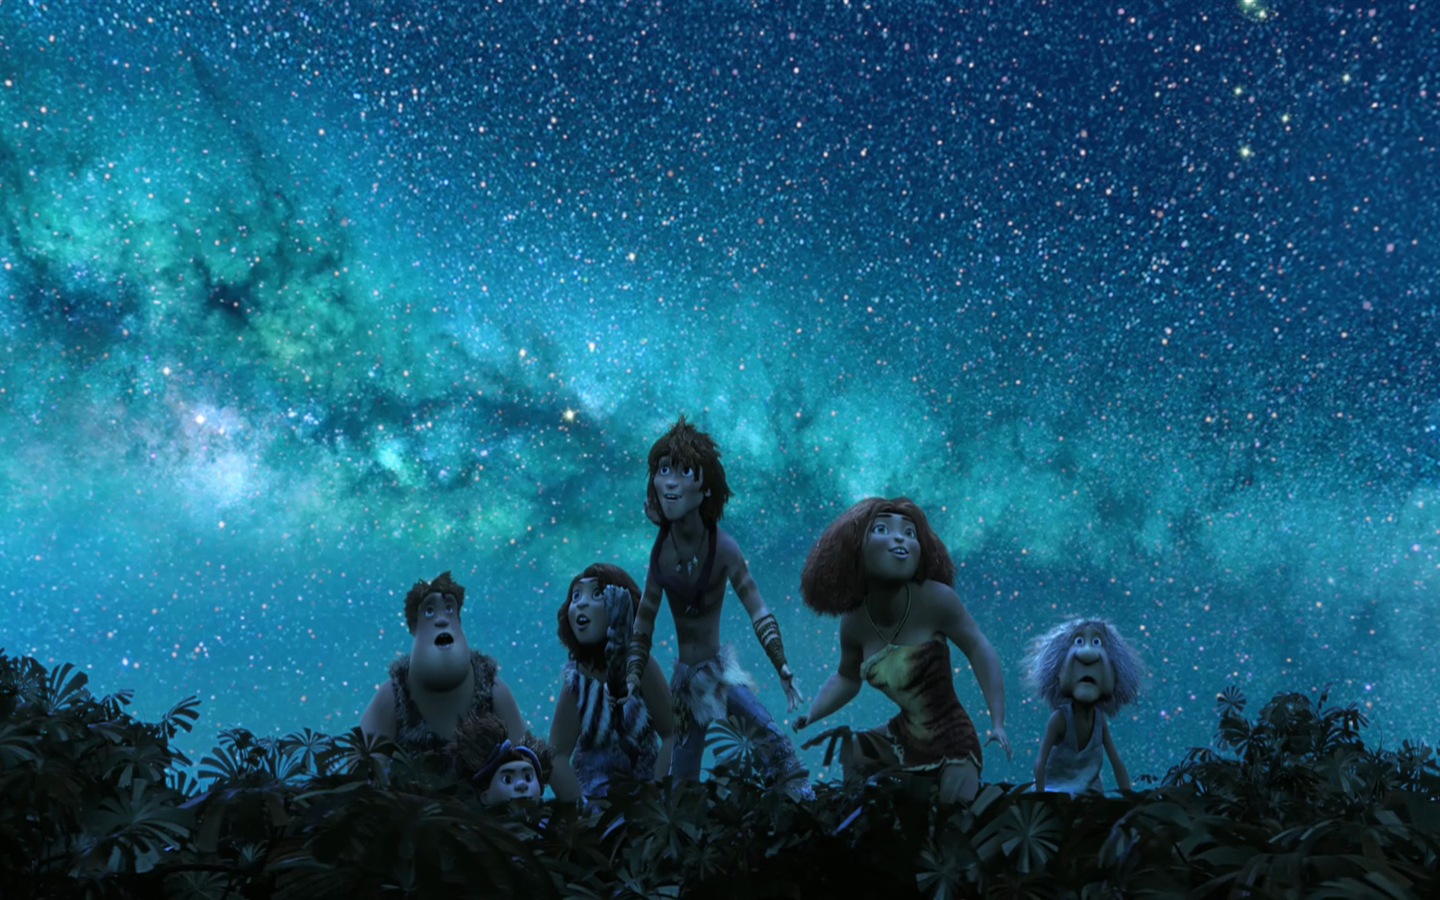 The Croods HD movie wallpapers #16 - 1440x900